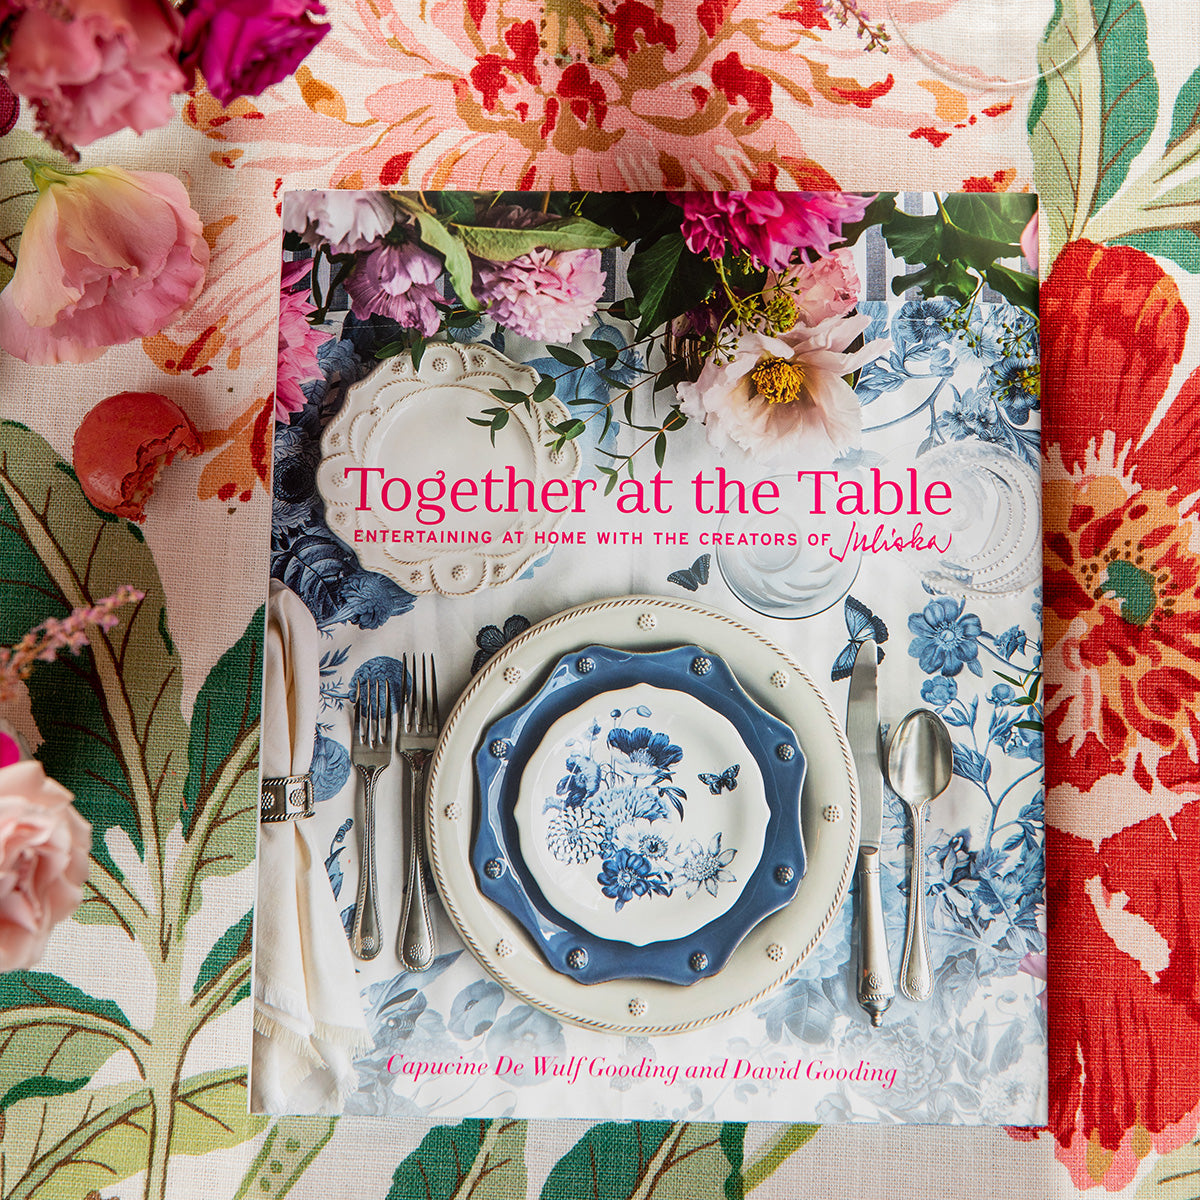 Together at the Table: Entertaining at Home with the Creators of Juliska